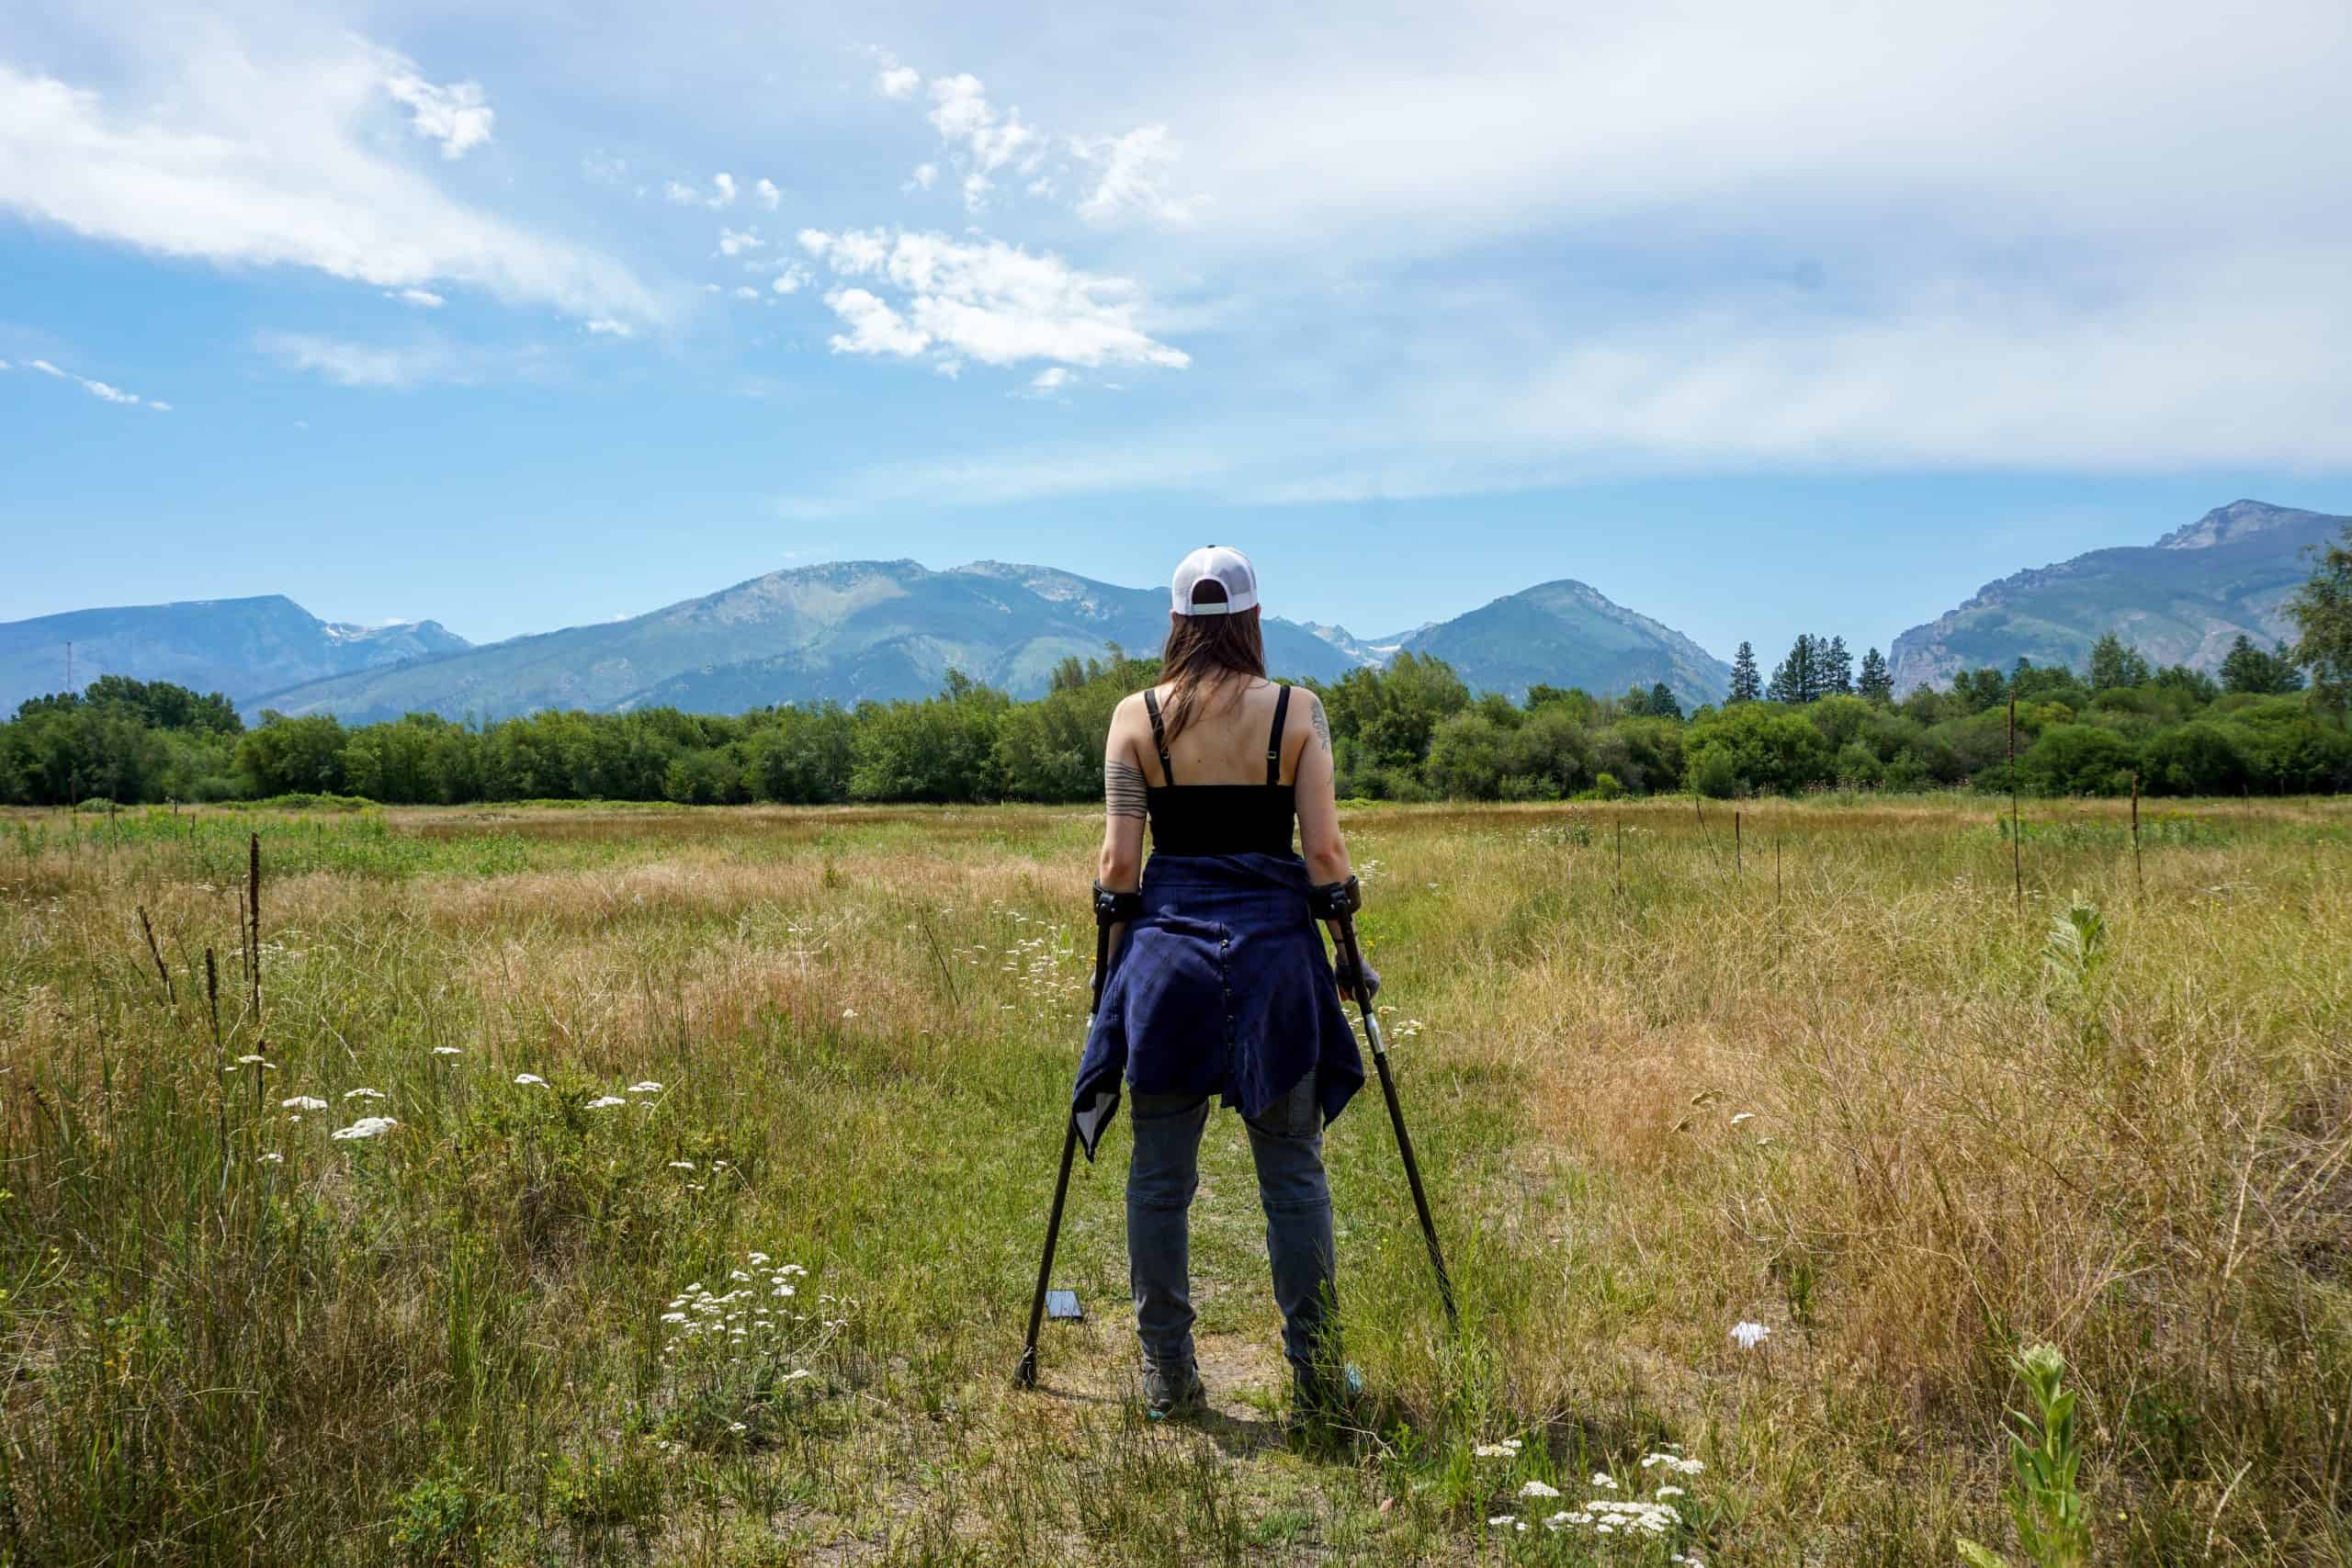 Contributor standing with walking sticks, in front of mountain view on horizon